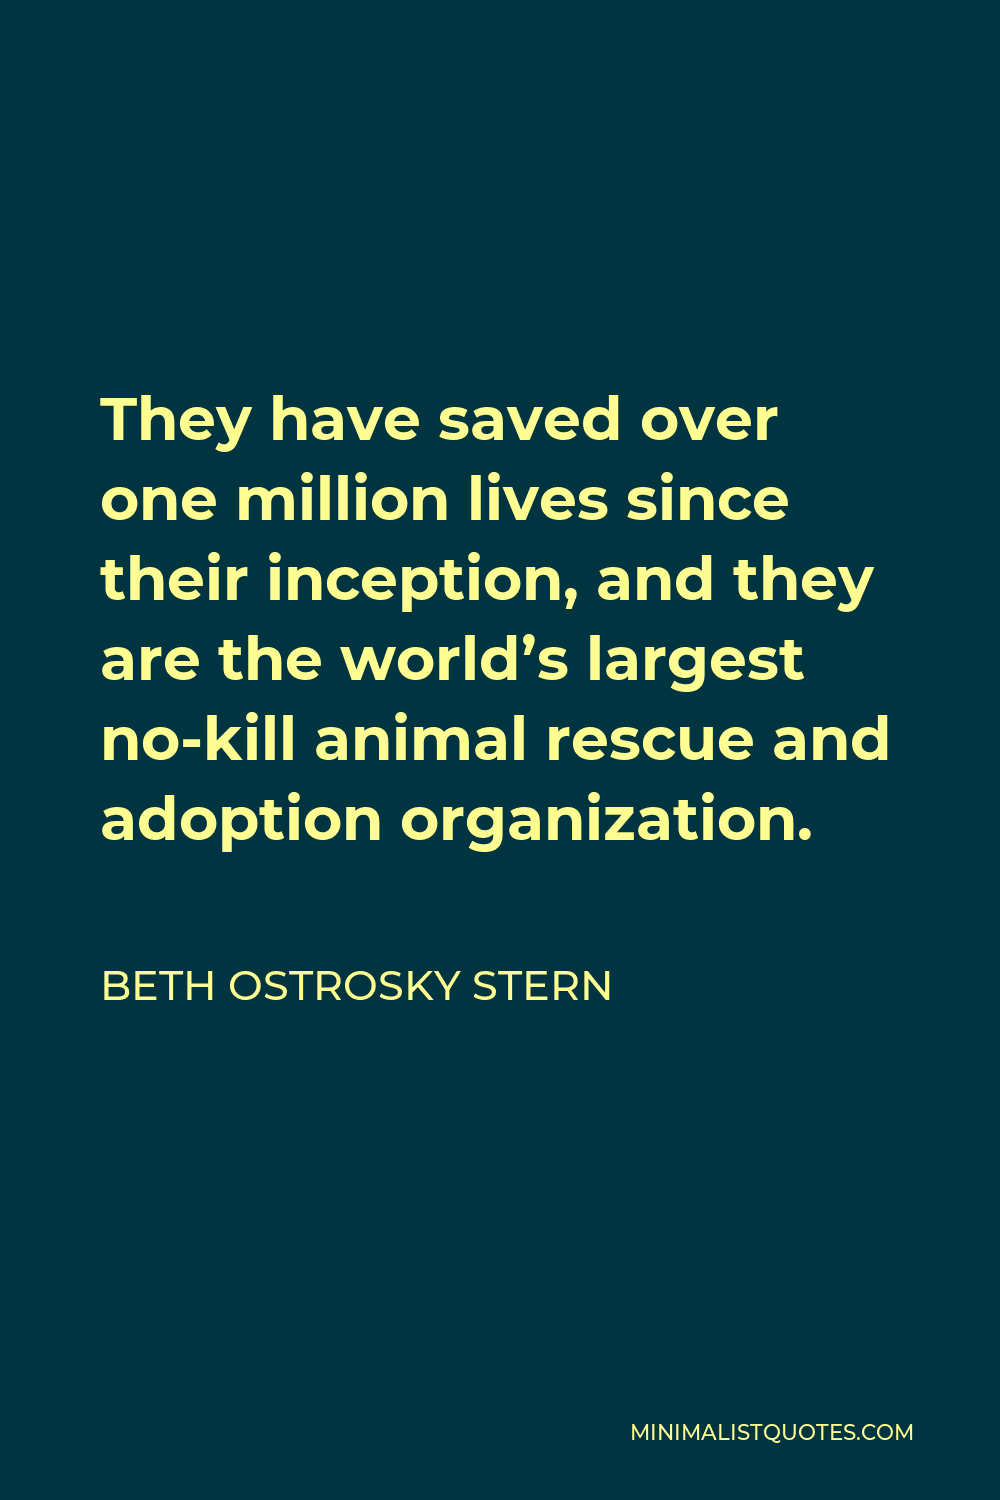 Beth Ostrosky Stern Quote - They have saved over one million lives since their inception, and they are the world’s largest no-kill animal rescue and adoption organization.